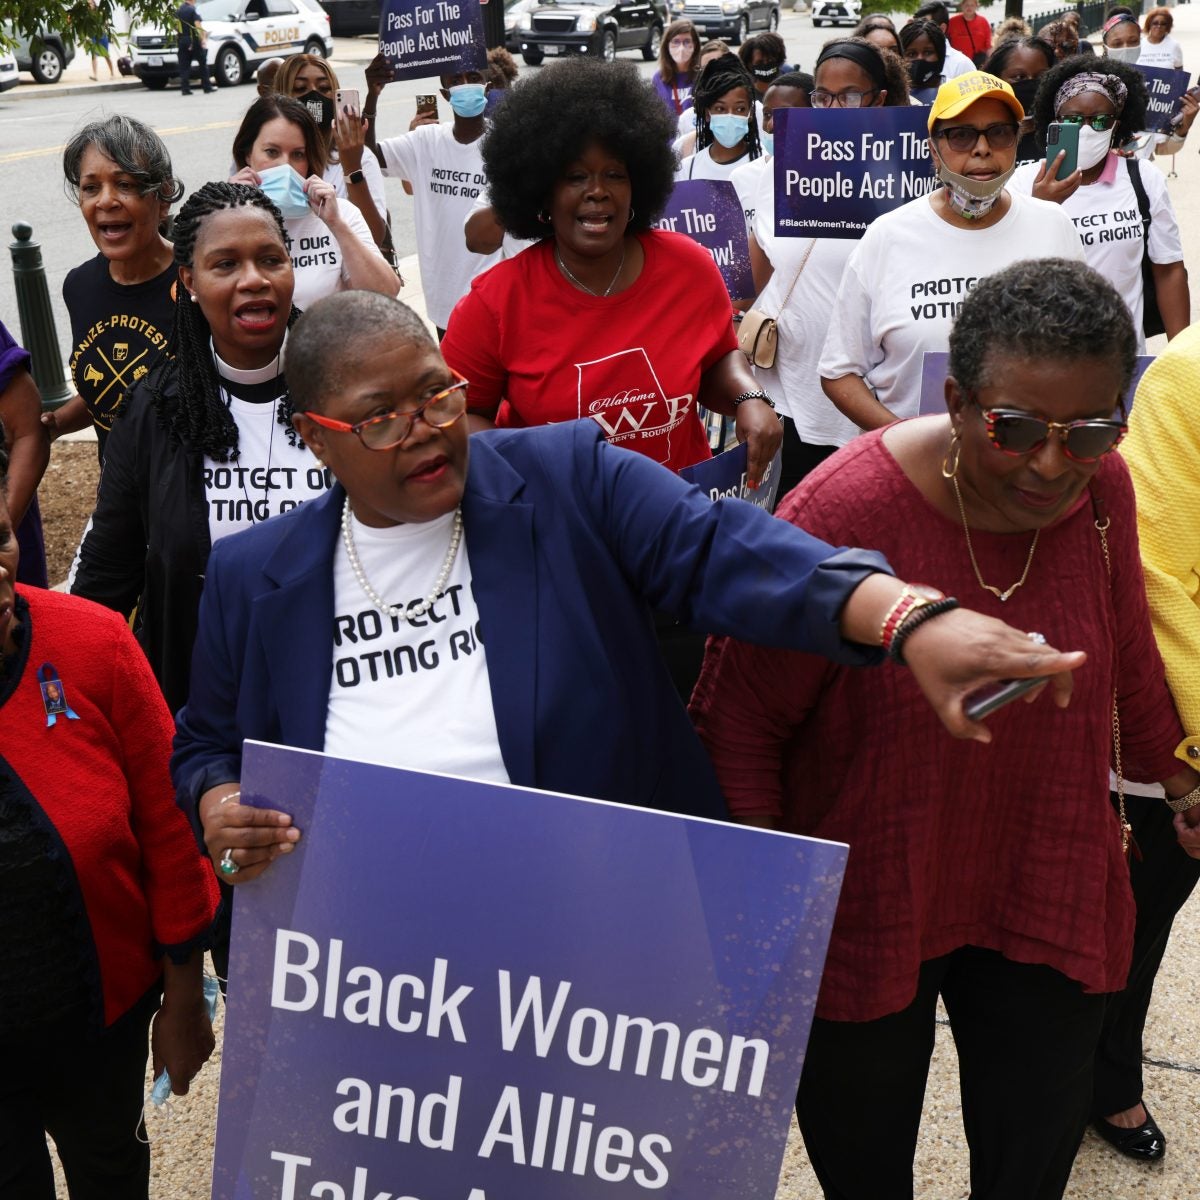 "Our Rights Are On The Chopping Block"— Black Women Leaders, Allies Rally Congress For Voting Rights And Economic Justice